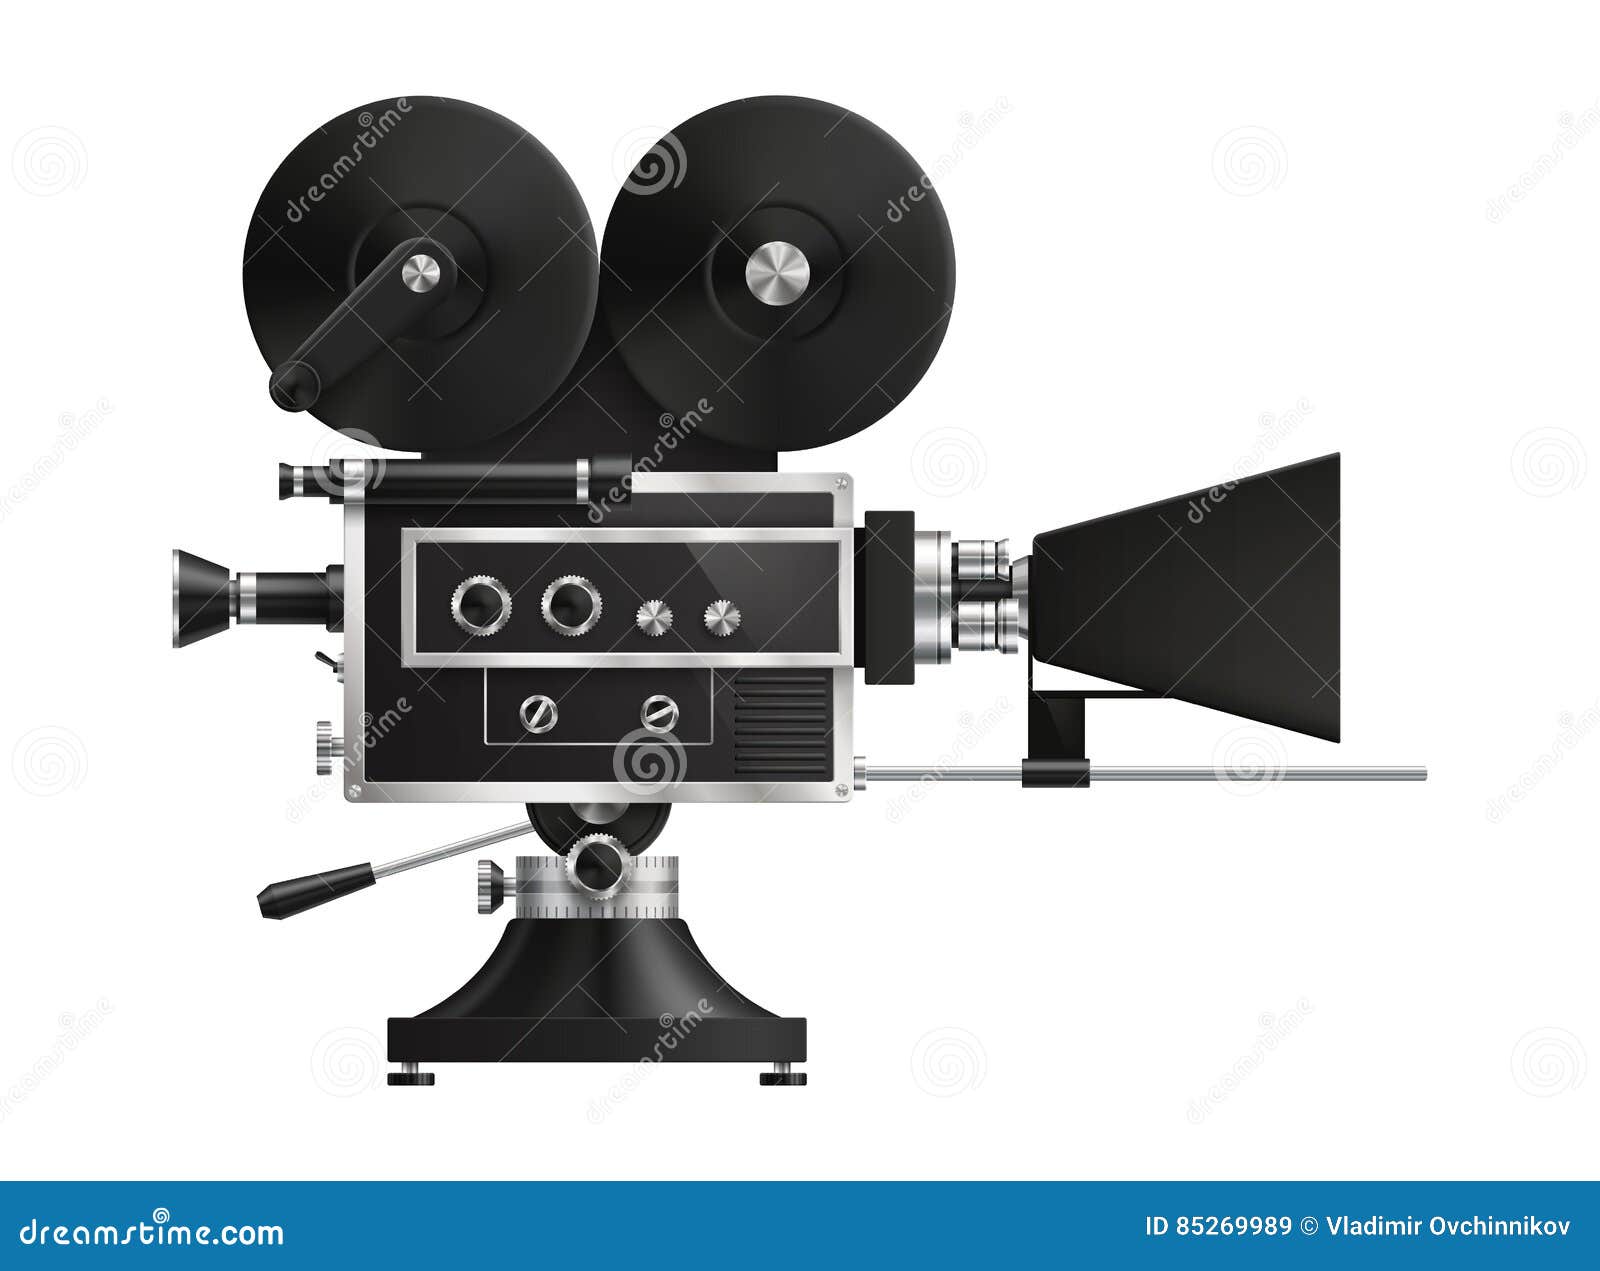 https://thumbs.dreamstime.com/z/vintage-film-projector-very-realistic-high-detailed-cinema-icon-eps-contains-transparency-85269989.jpg